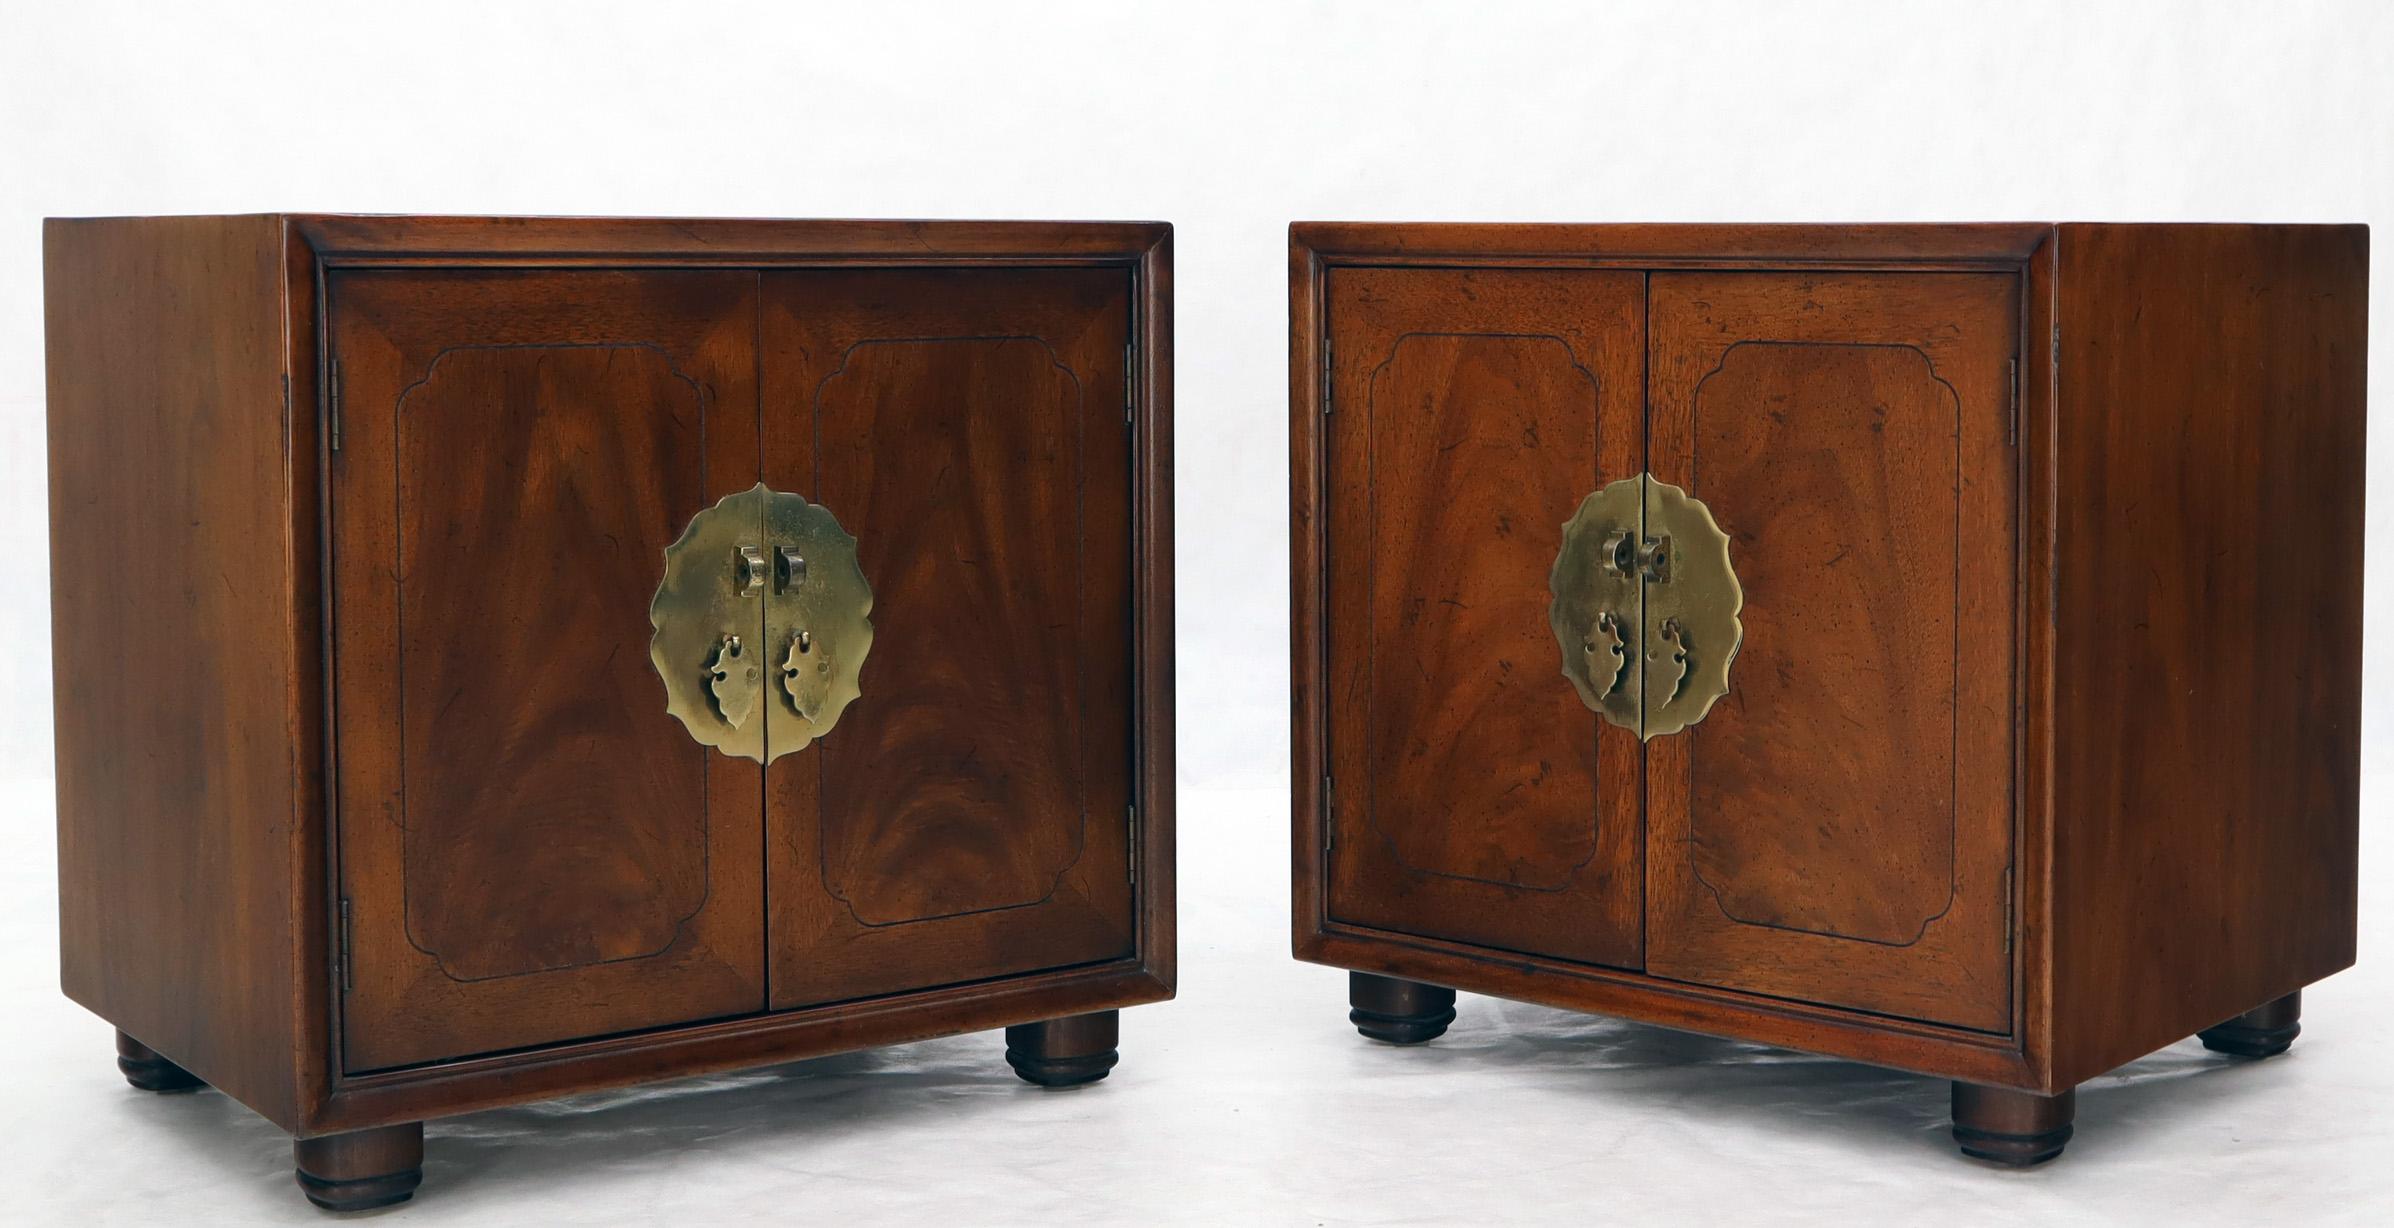 Pair of Mid-Century Modern nightstands tables by Henredon in medium walnut finish. Featuring large decorative brass hardware section with pulls.